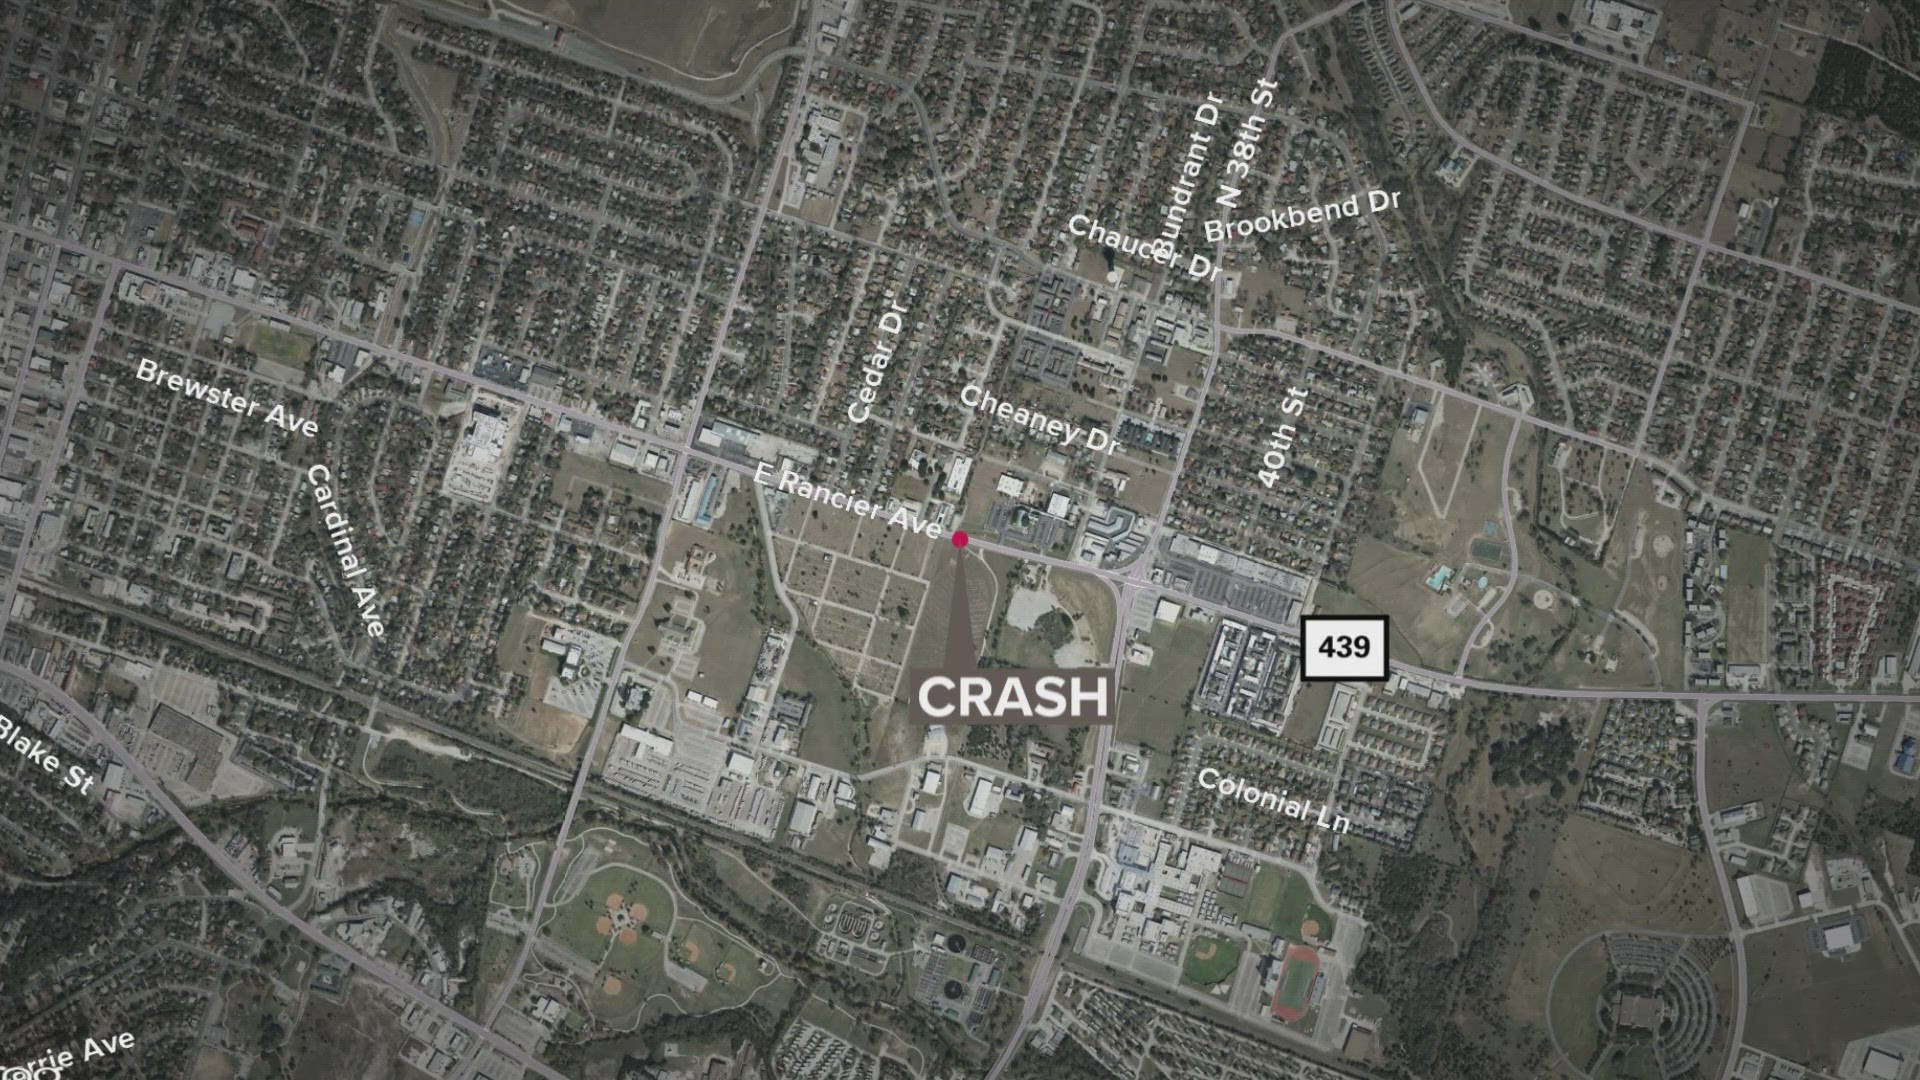 Killeen Police say alcohol may have been a factor in this crash.